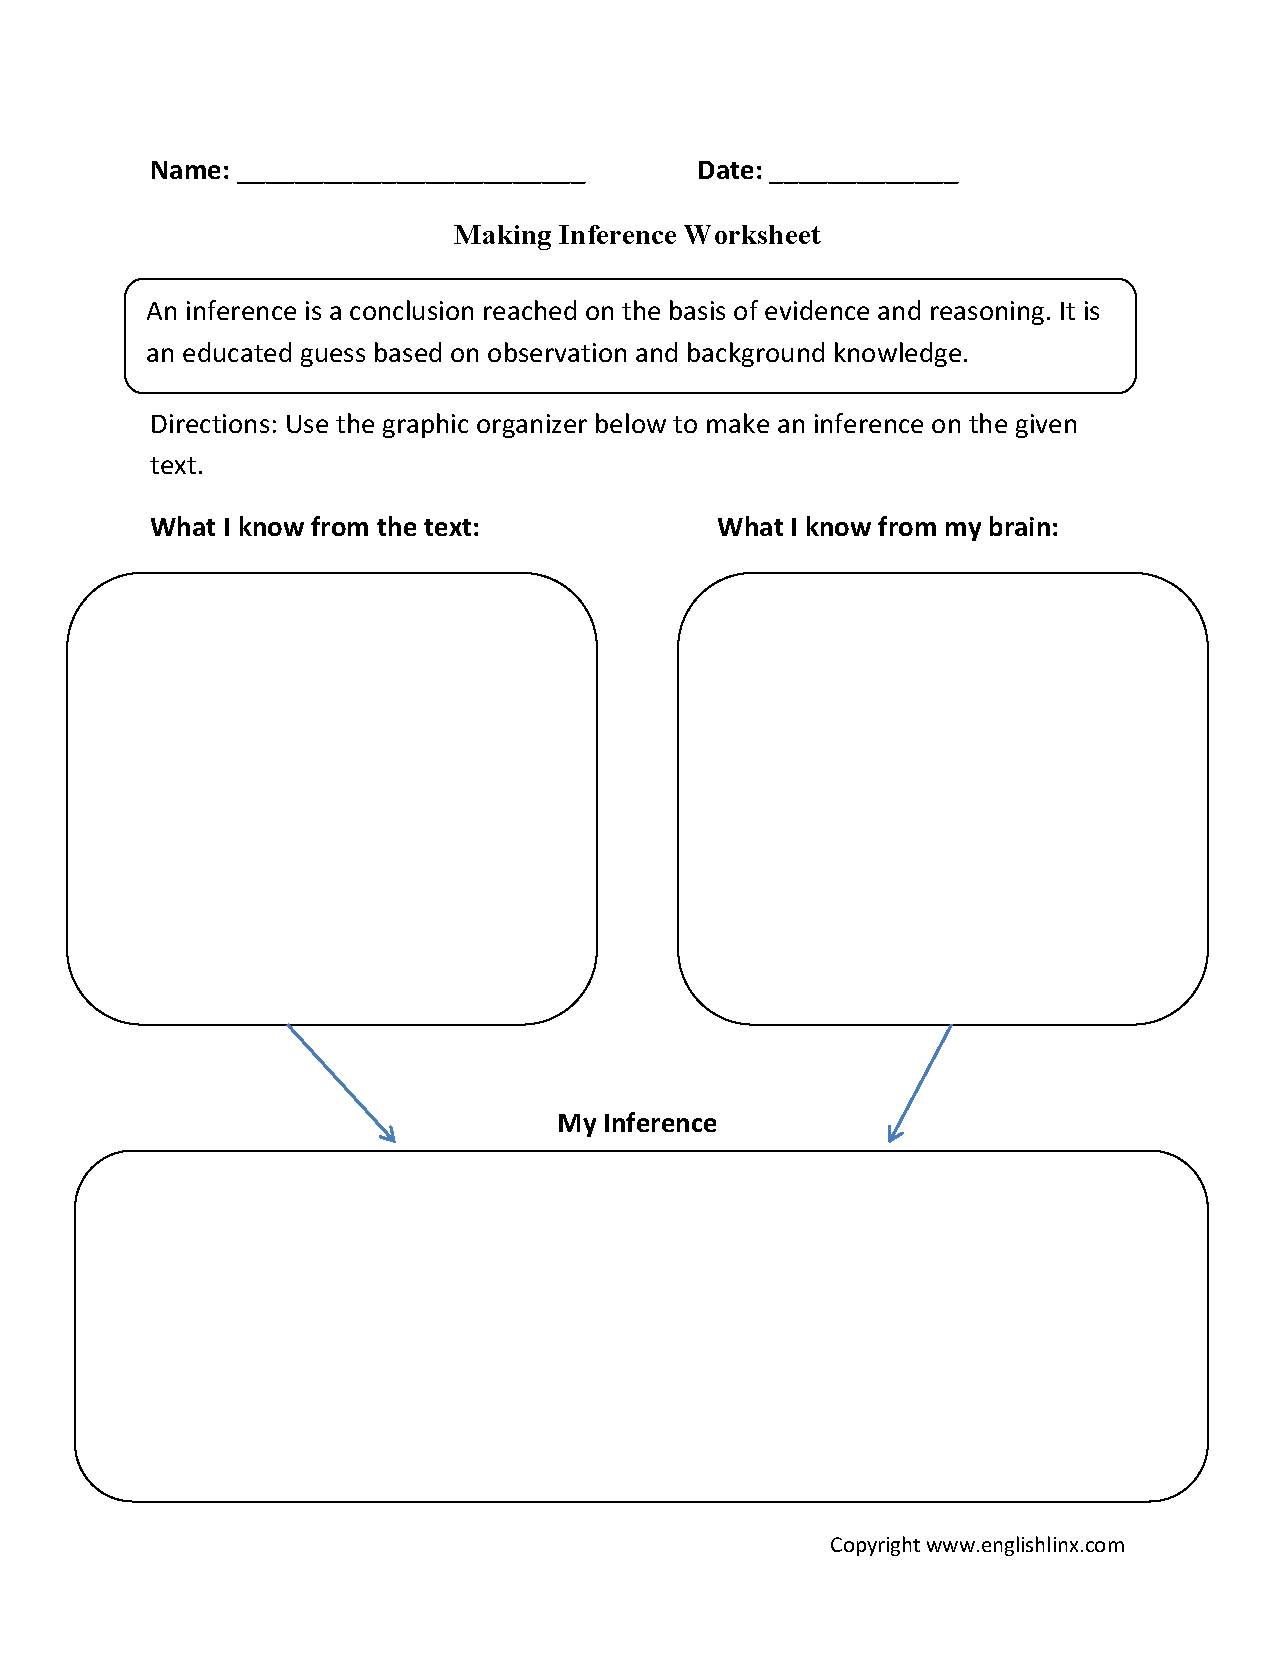 17-best-images-of-second-grade-making-inferences-worksheets-inference